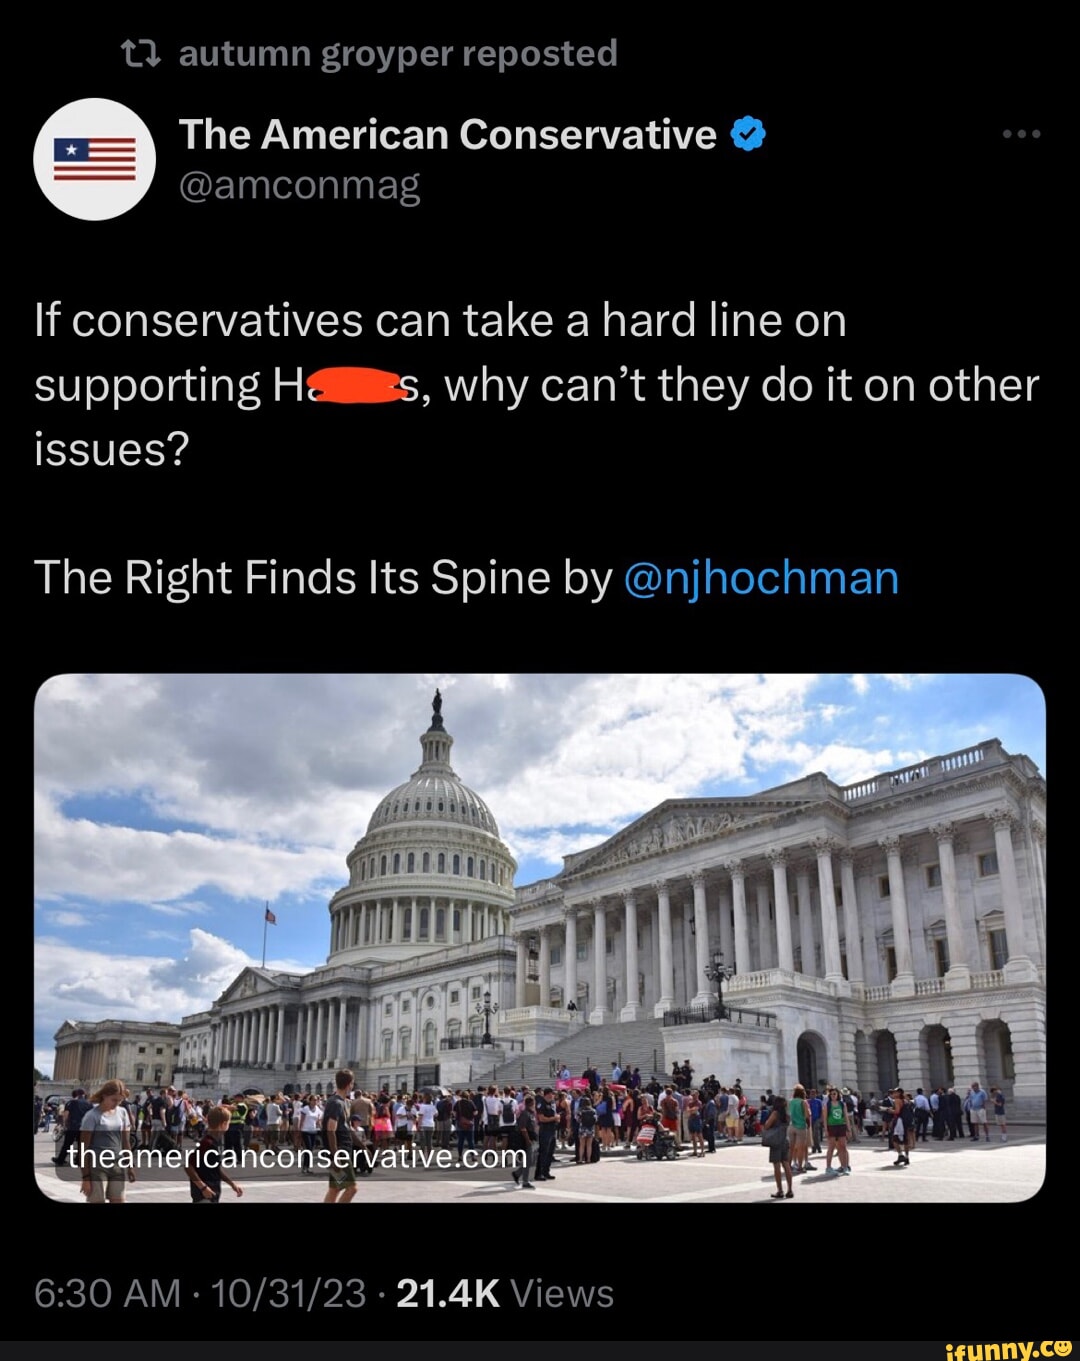 Autumn groyper reposted The American Conservative @ @amconmag If ...